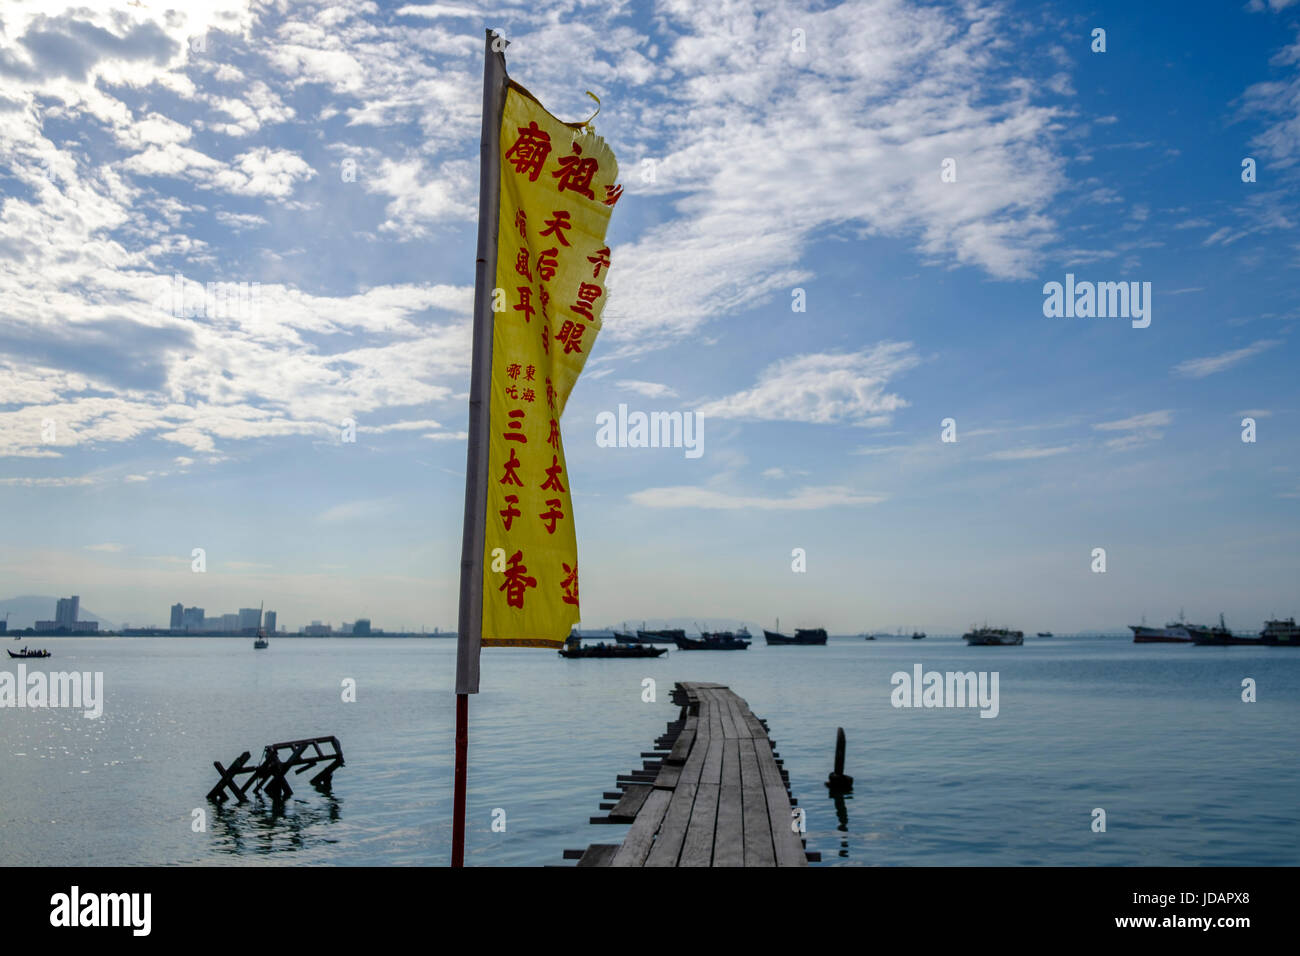 View of Penang harbour and the boardwalk and flag of Tan Jetty, one of the six Chinese Clan Jetties of Penang, Pulau Pinang, Malaysia. Stock Photo